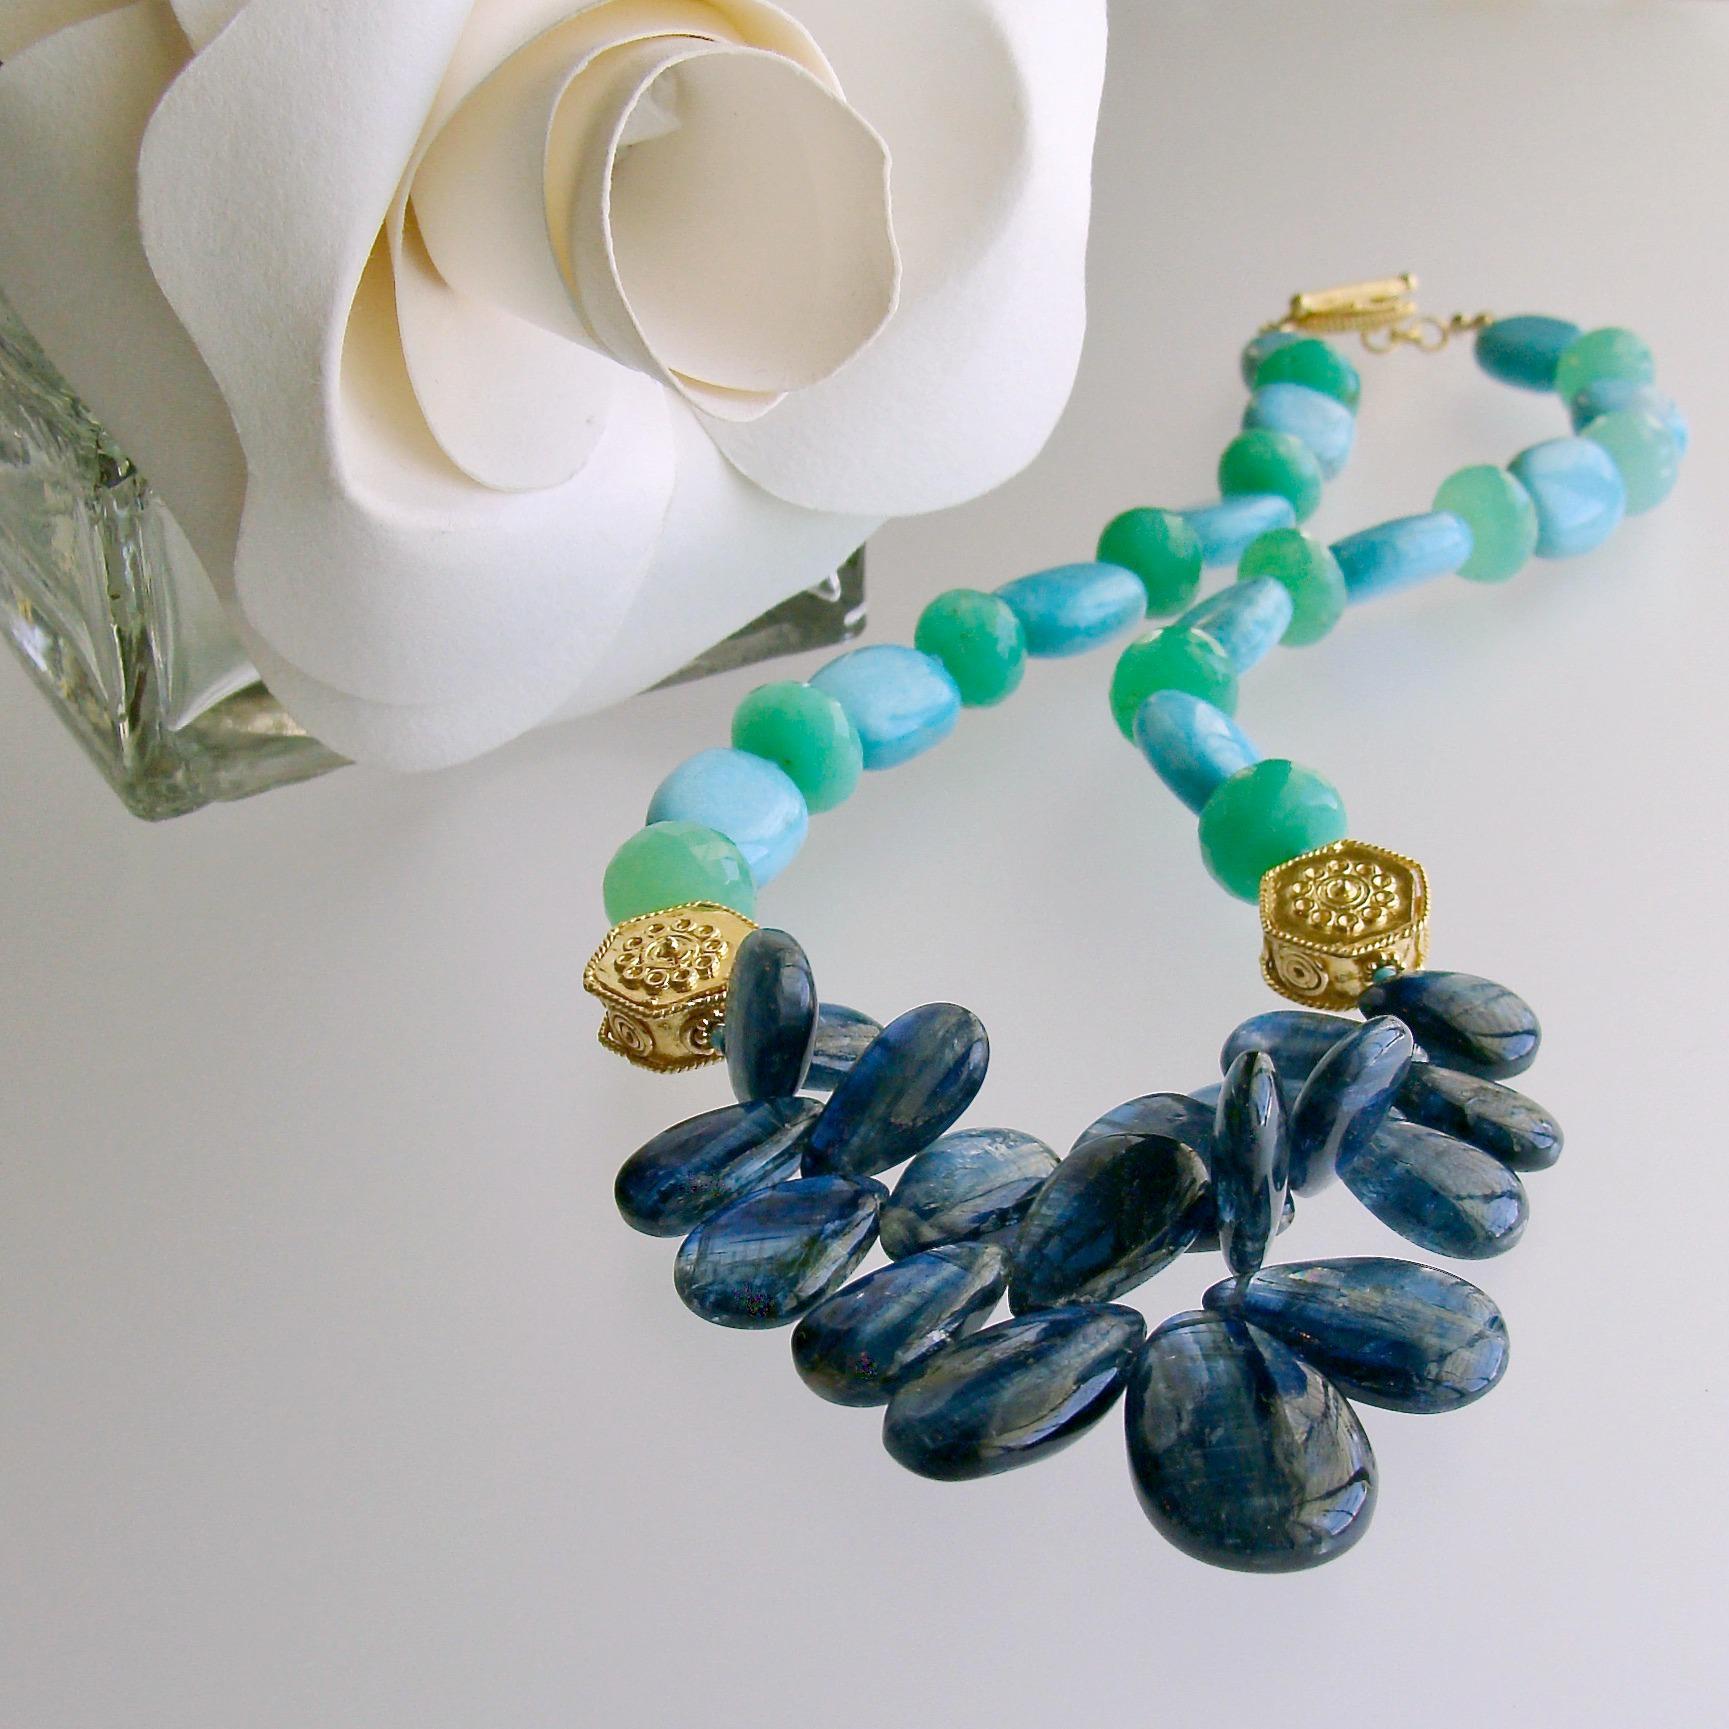 Huge kyanite briolettes in Panatone’s gorgeous 2020 Color Of The Year, Classic Blue, are the focal point of this stunning statement necklace.  This cluster of drama is intercepted with large gold vermeil hexagon beads and juxtaposed with luxe Spring